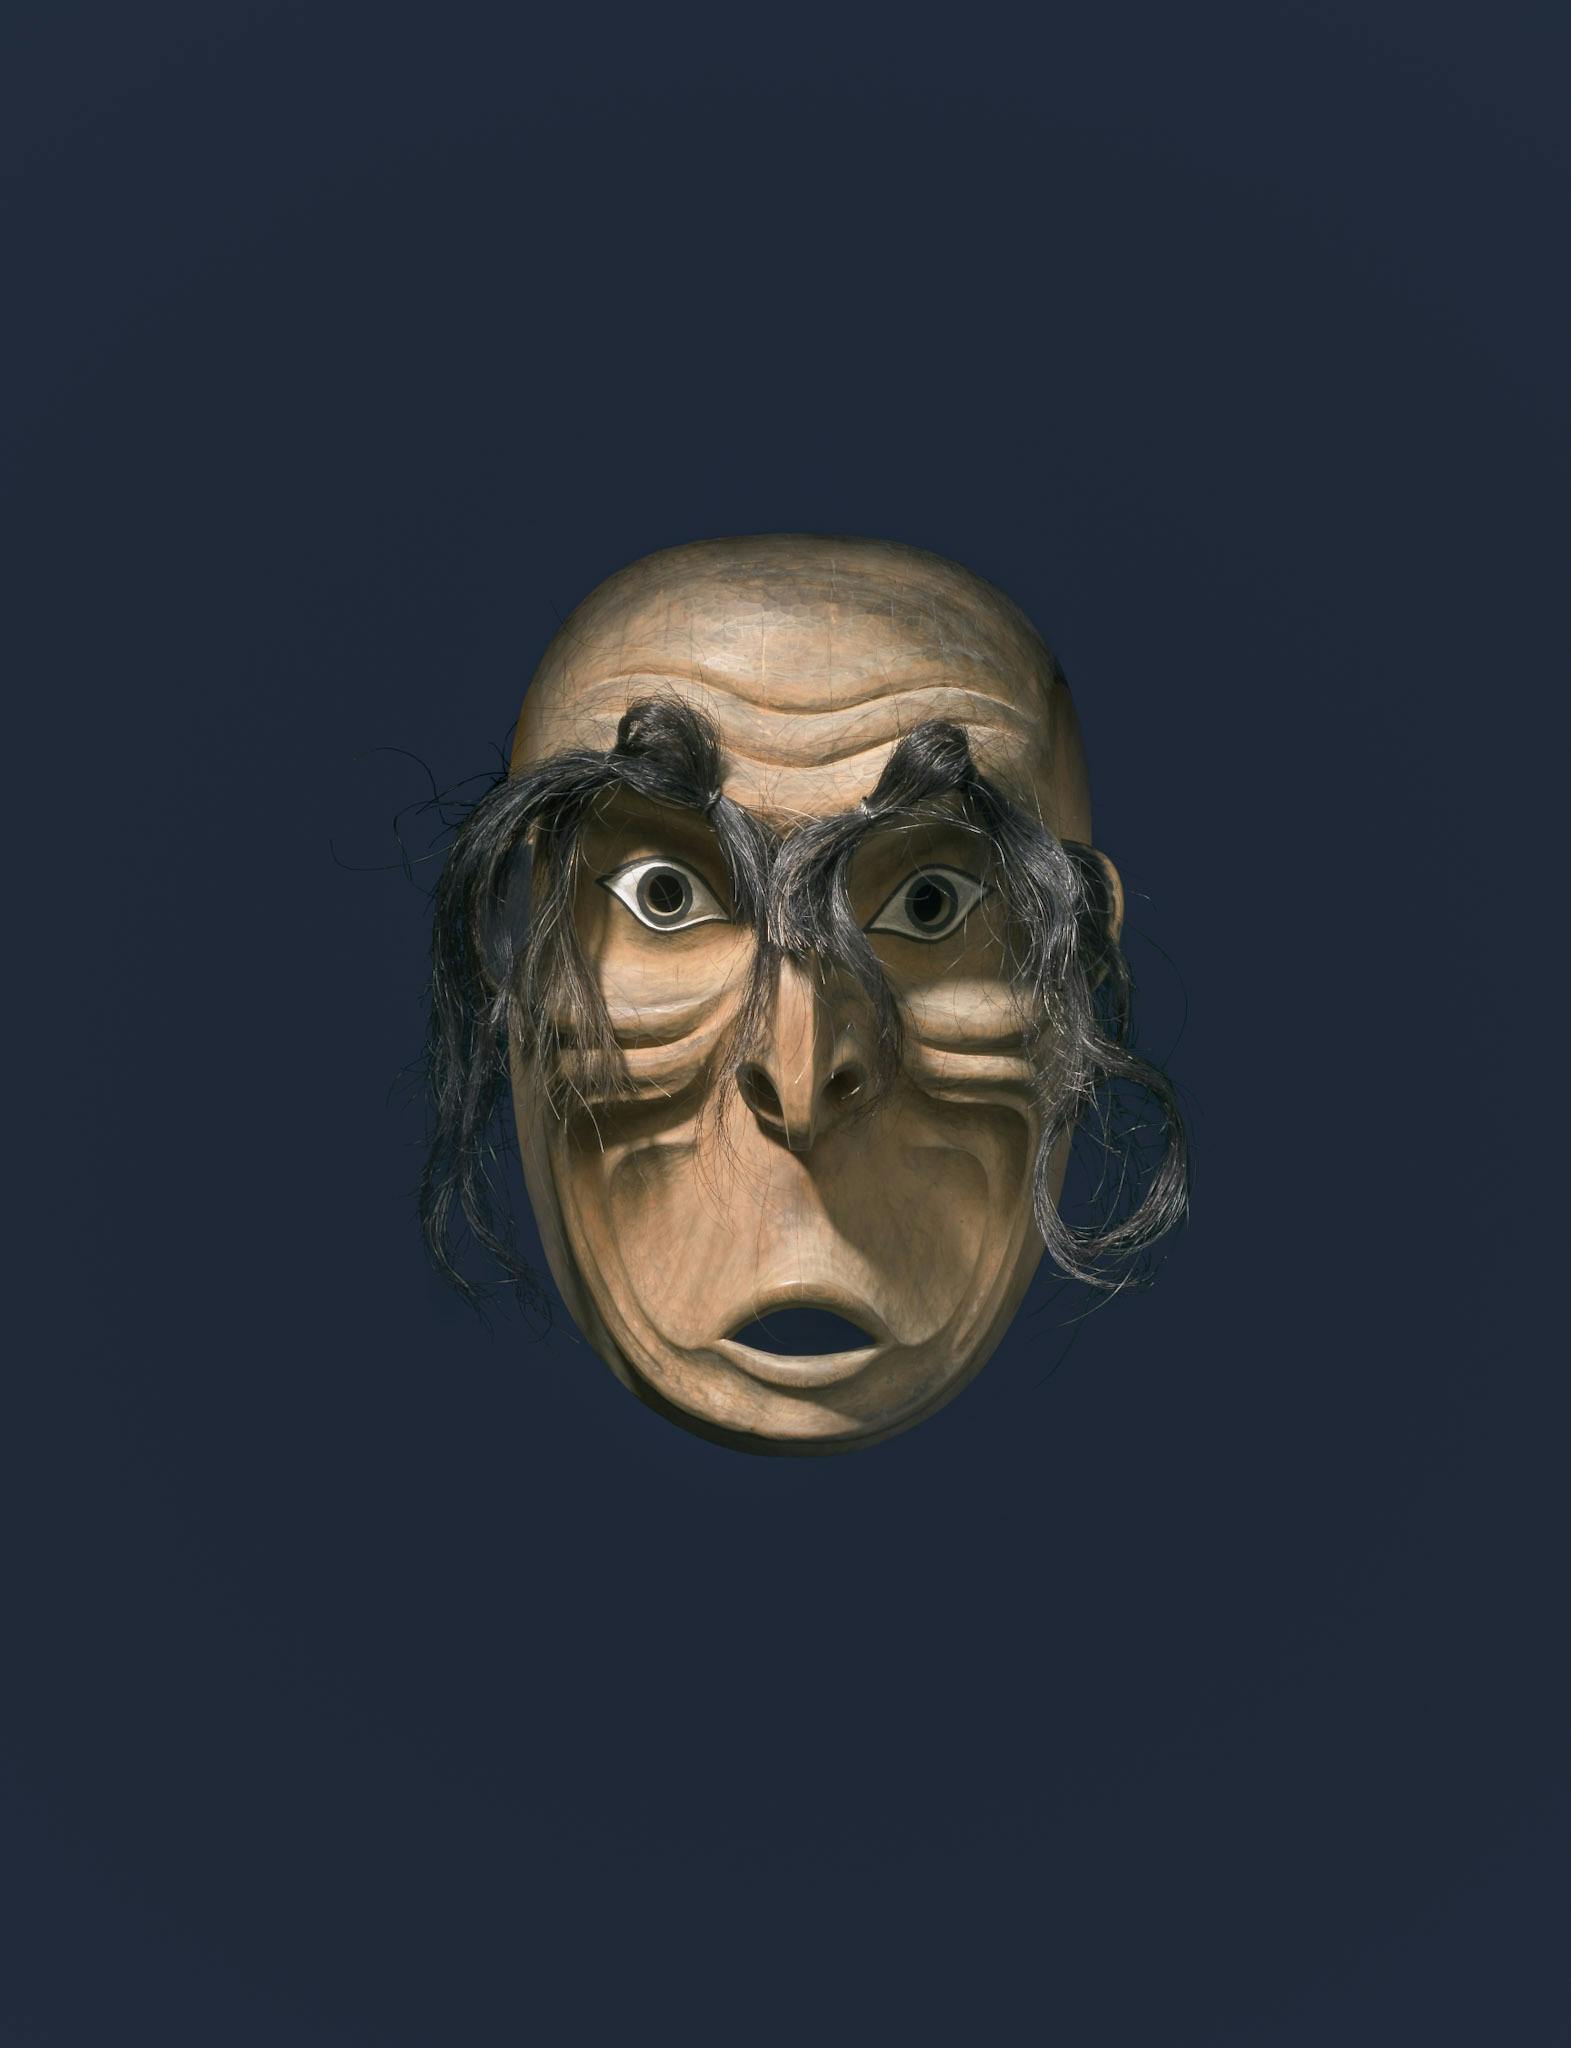 Installation image of Beau Dick’s carved wood mask in front of a black background. The mask has a pair of very long black eyebrows. The mask has a pair of wide-open eyes, a sharp nose, and a mouth opened in a shape of making a “u” sound.